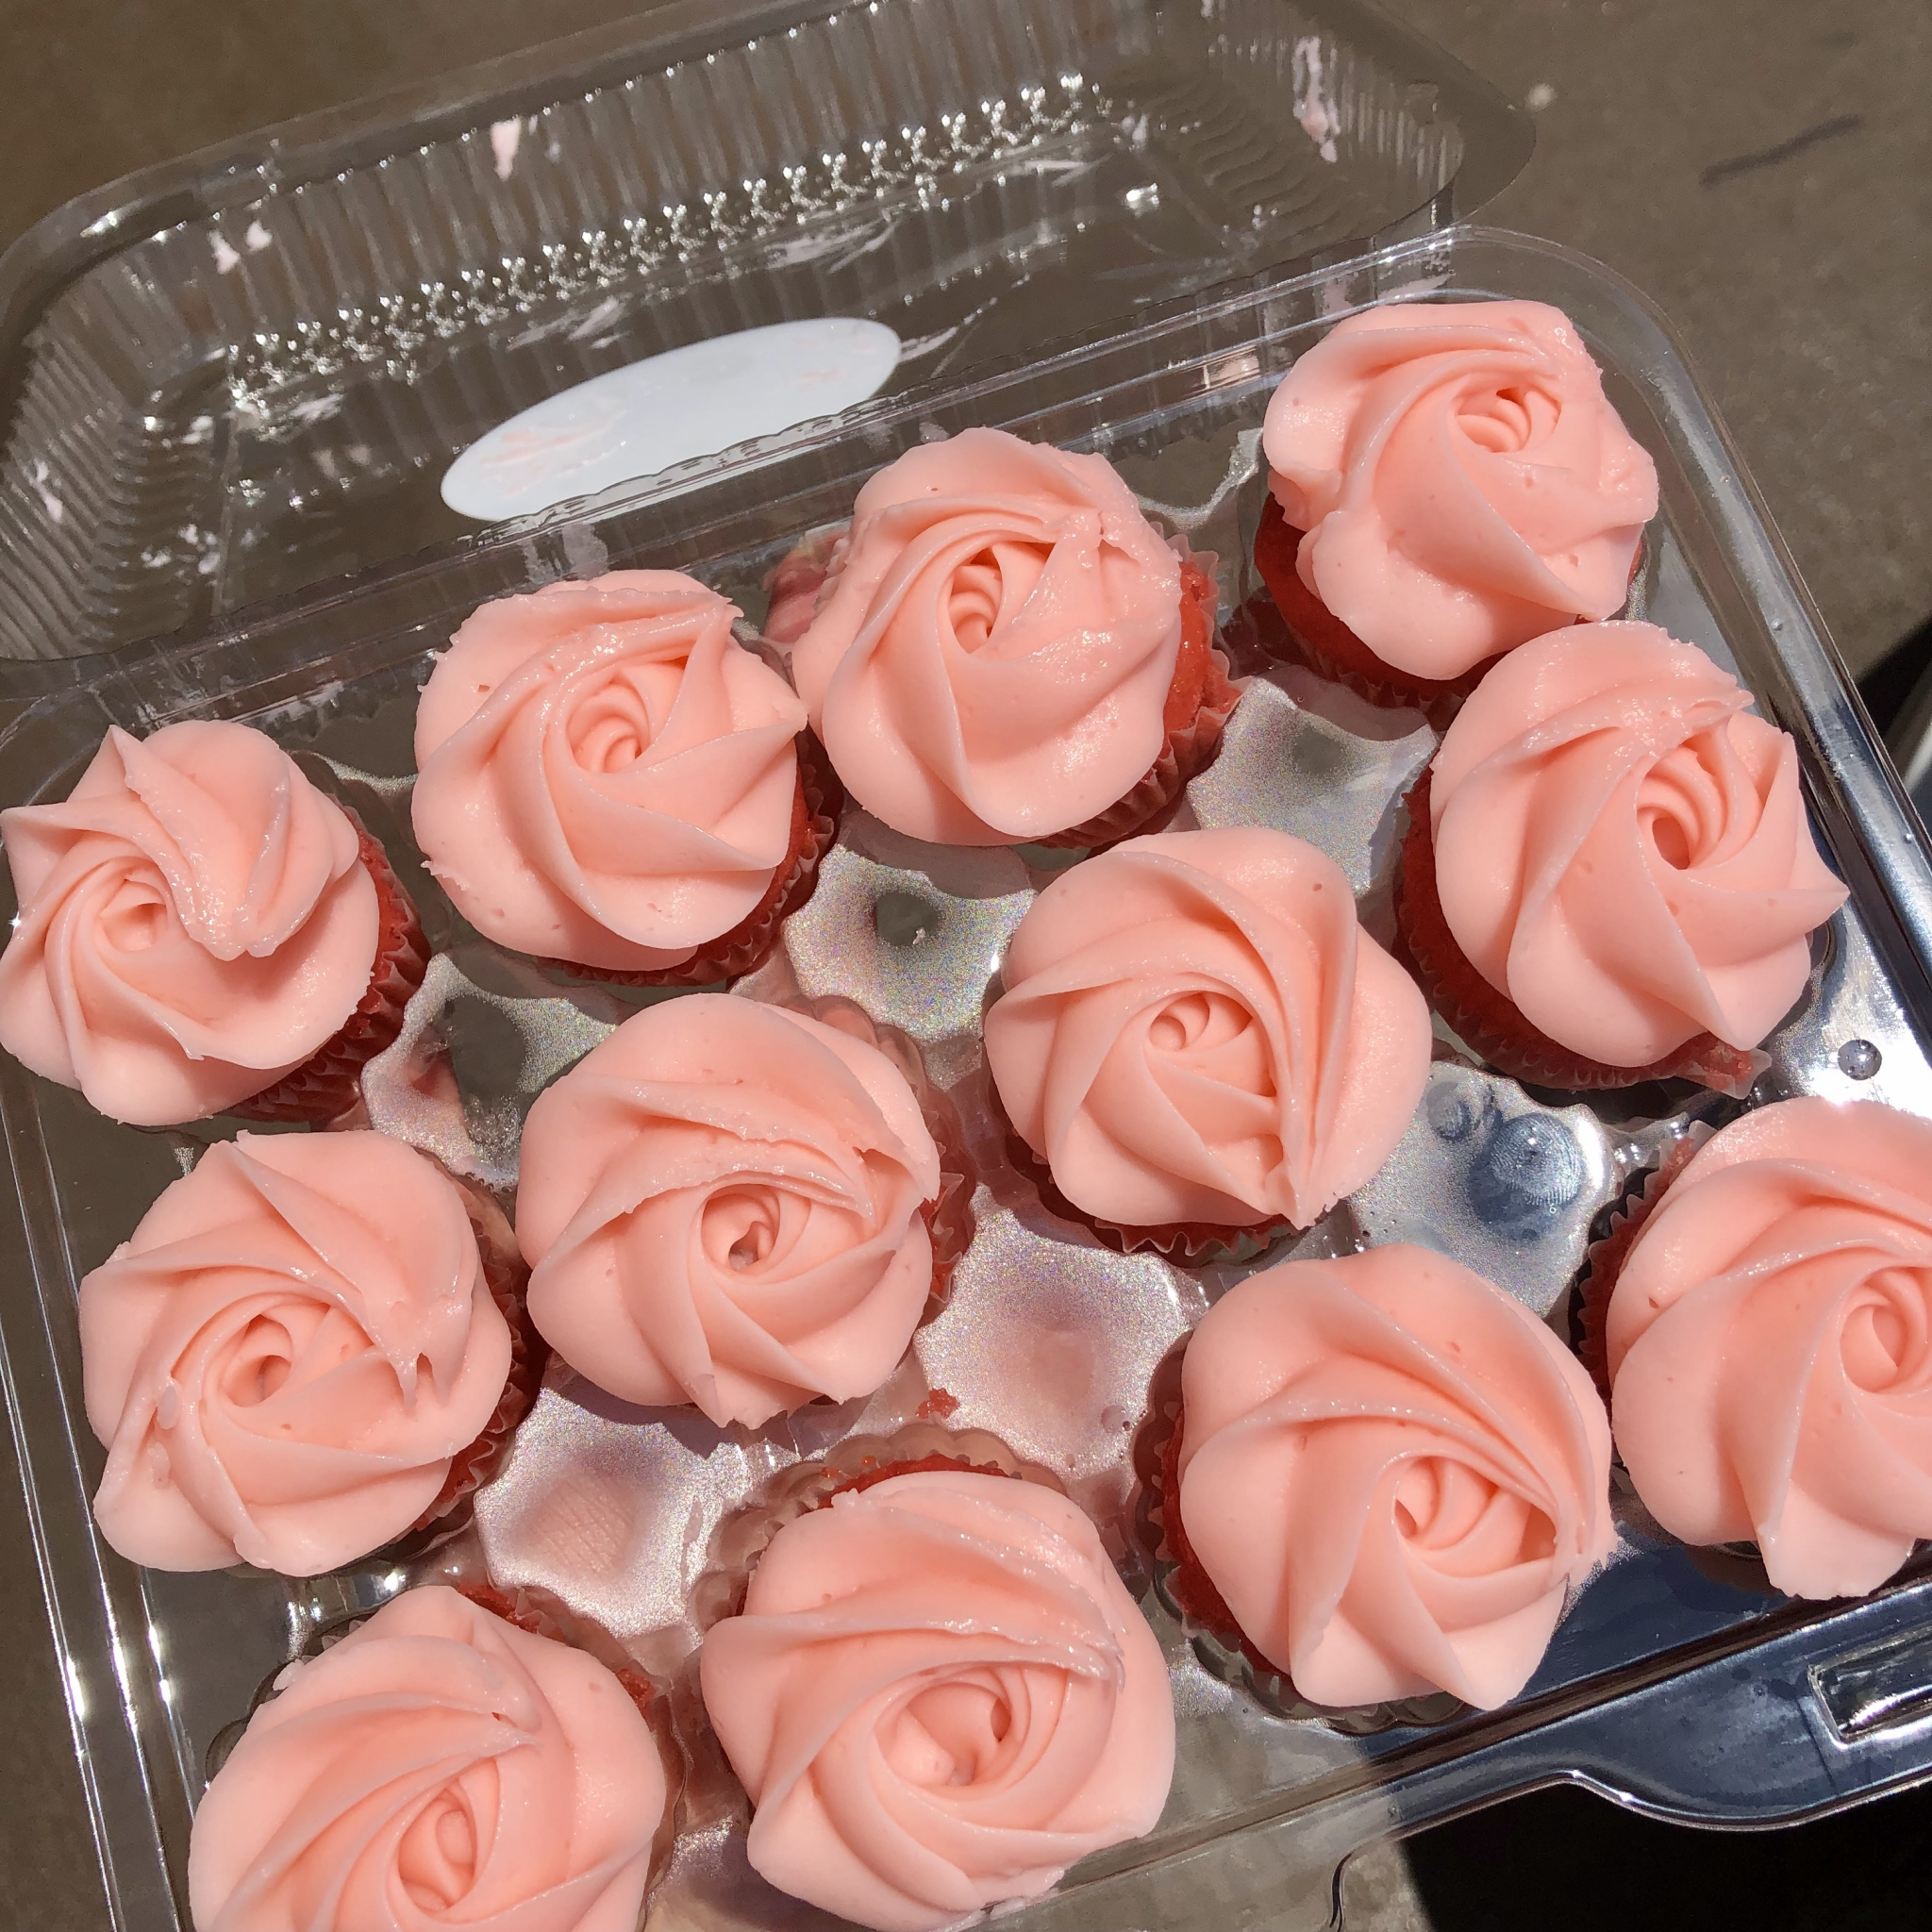 Ashley Macs cupcakes1 Ashley Mac’s strawberry cake has your name on it. Win one + steak dinner for 2